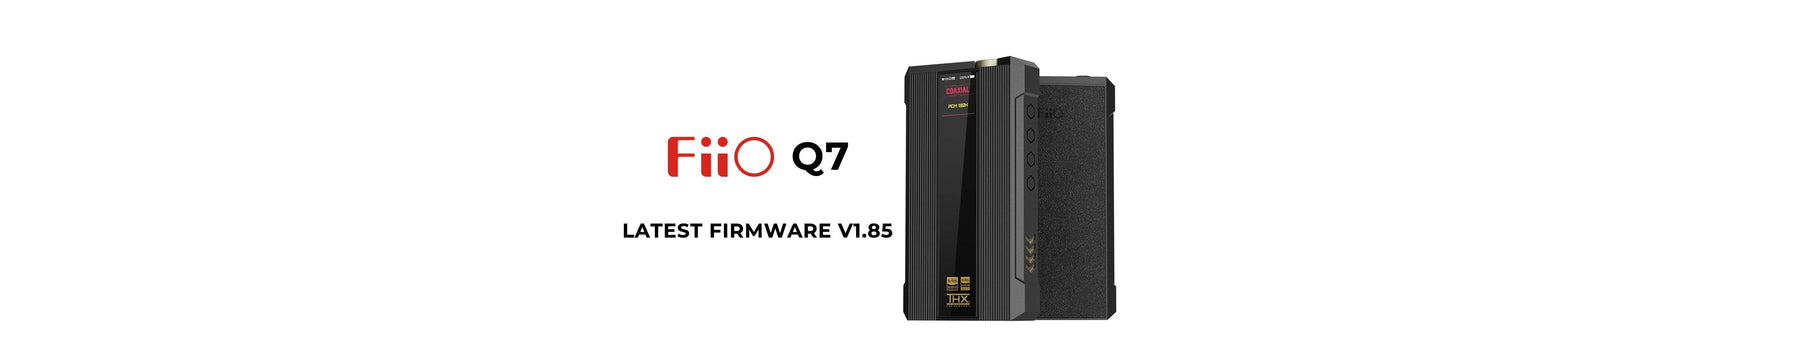 Let's Update FiiO BTR7 To Latest Firmware V1.85: Adds New Features and Functions With Minor Bug Fixes